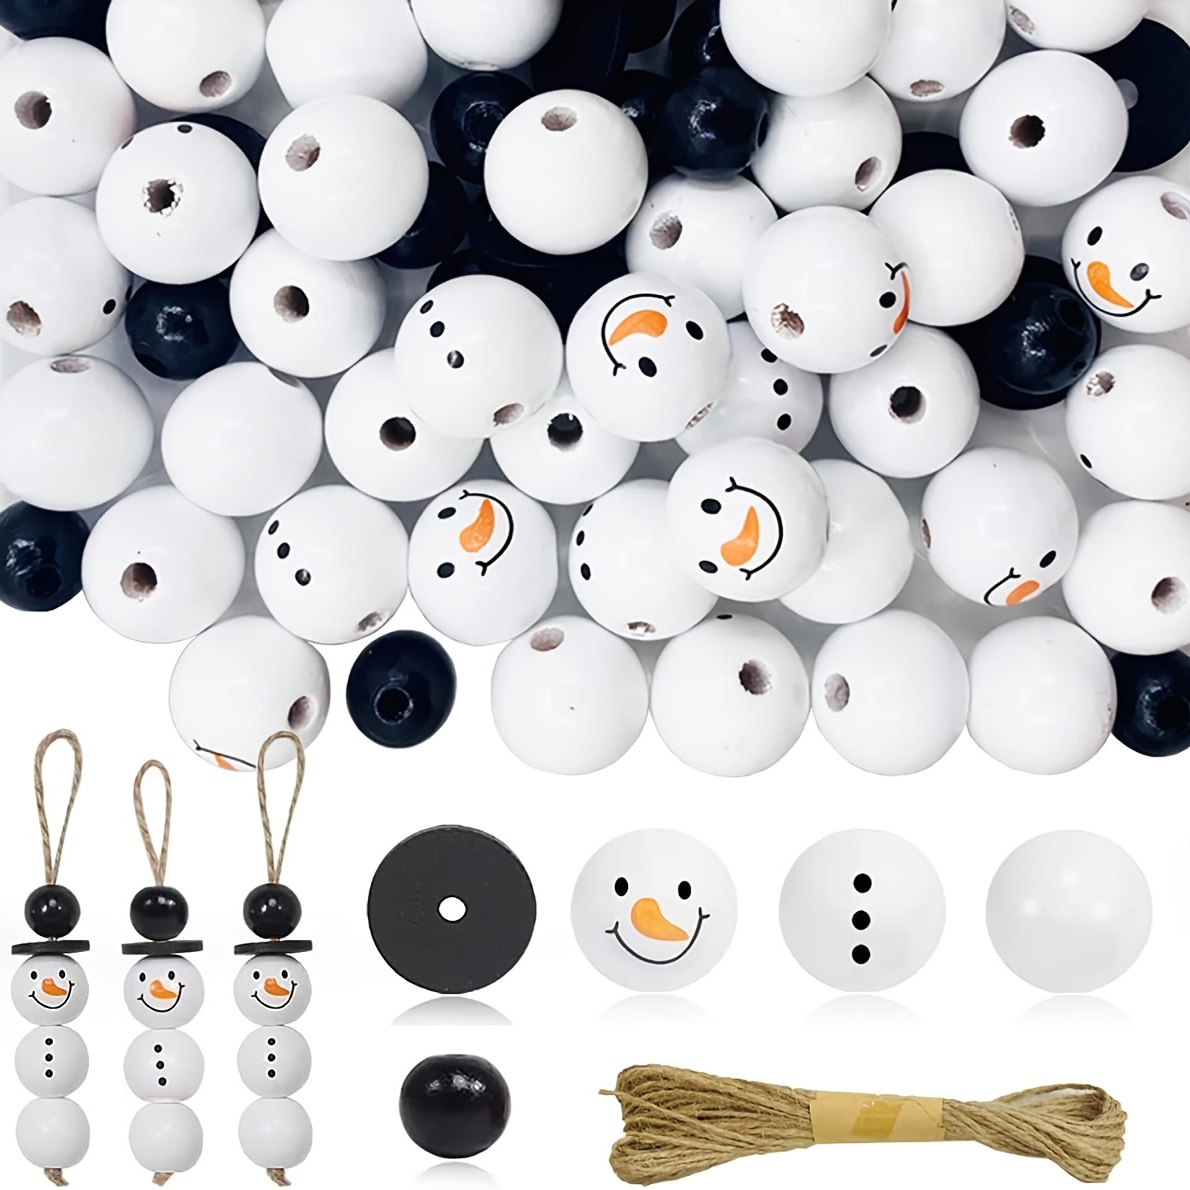 

50pcs/100pcs, Christmas Snowman Wooden Beads With Jute Twine, Winter White Round Wood Beads For Diy Crafting Making Holiday Party Home Decor